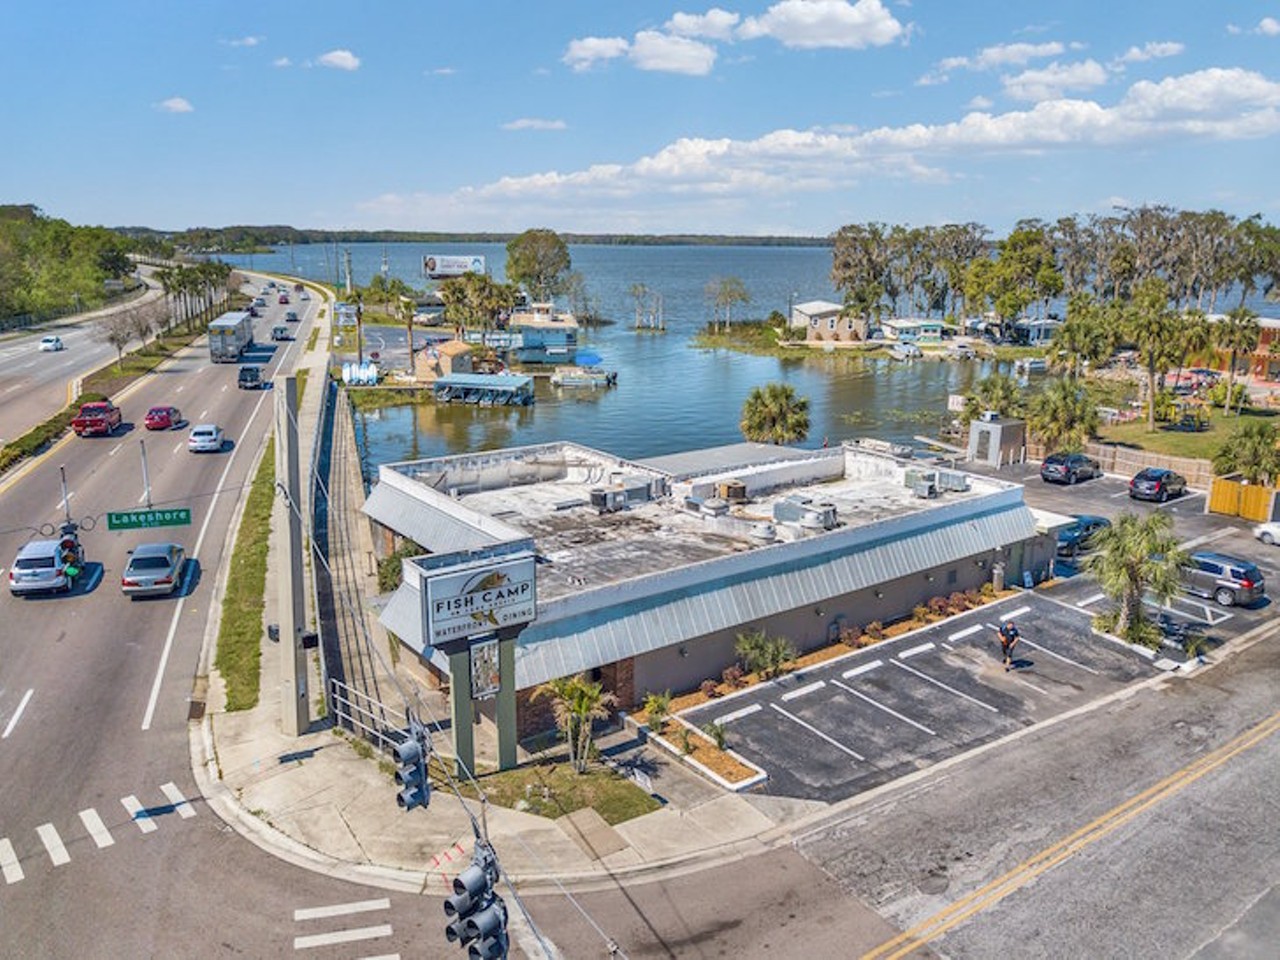 Fish Camp on Lake Eustis
901 Lakeshore Blvd., Tavares
This old-fashioned restaurant on Lake Eustis offers waterside dining and a bounty of seafood (plus some turf to go with your surf) and craft beers.